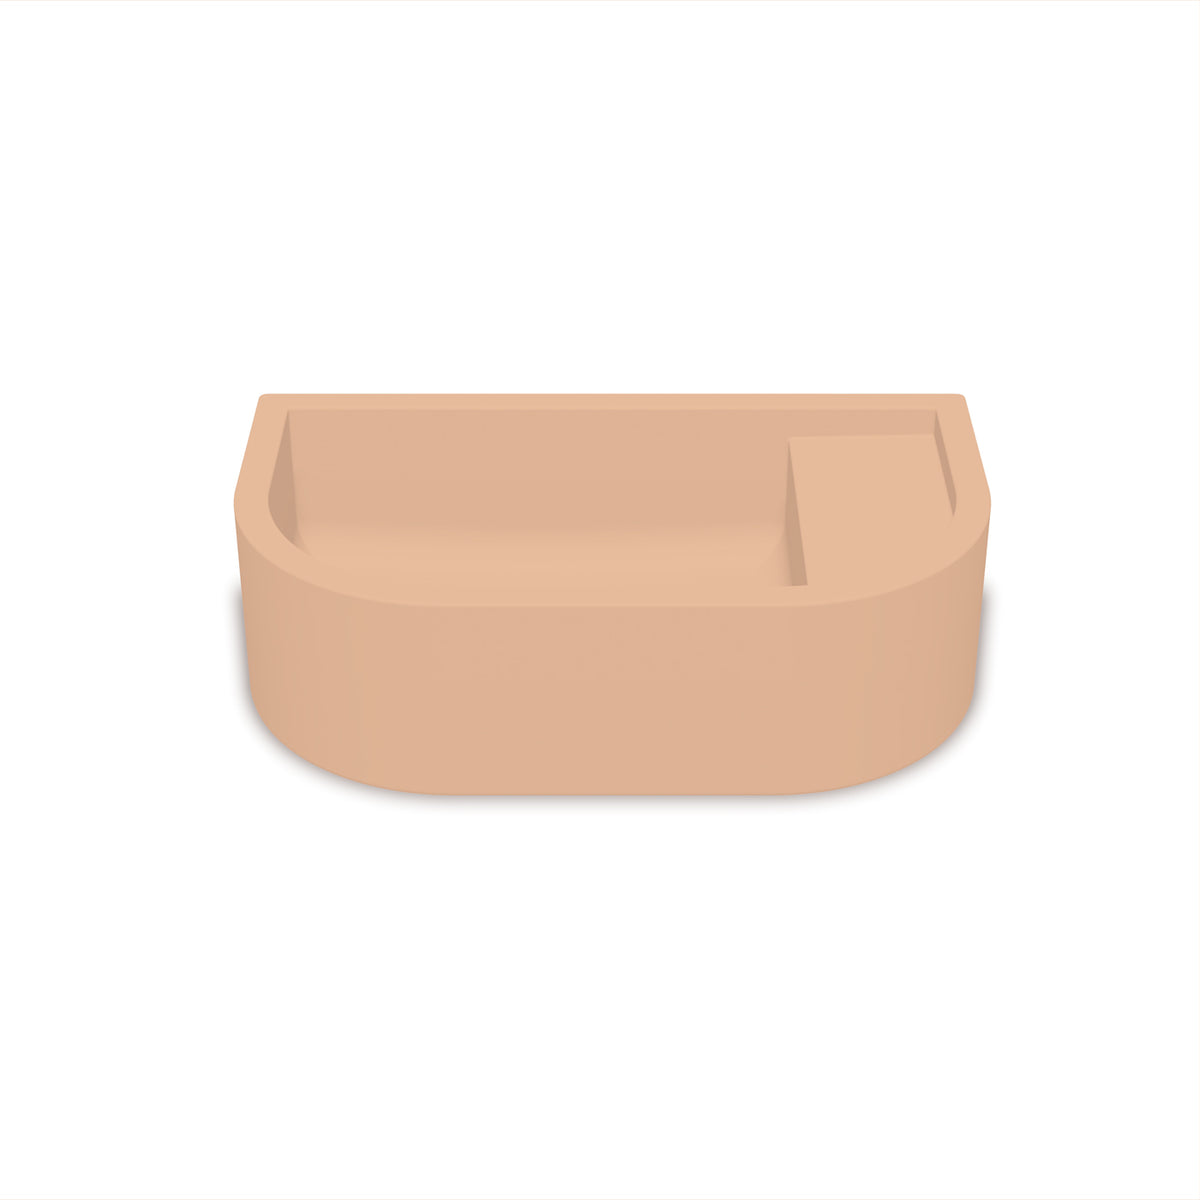 Loop 01 Basin - Overflow - Surface Mount (Pastel Peach,No Tap Hole,White)